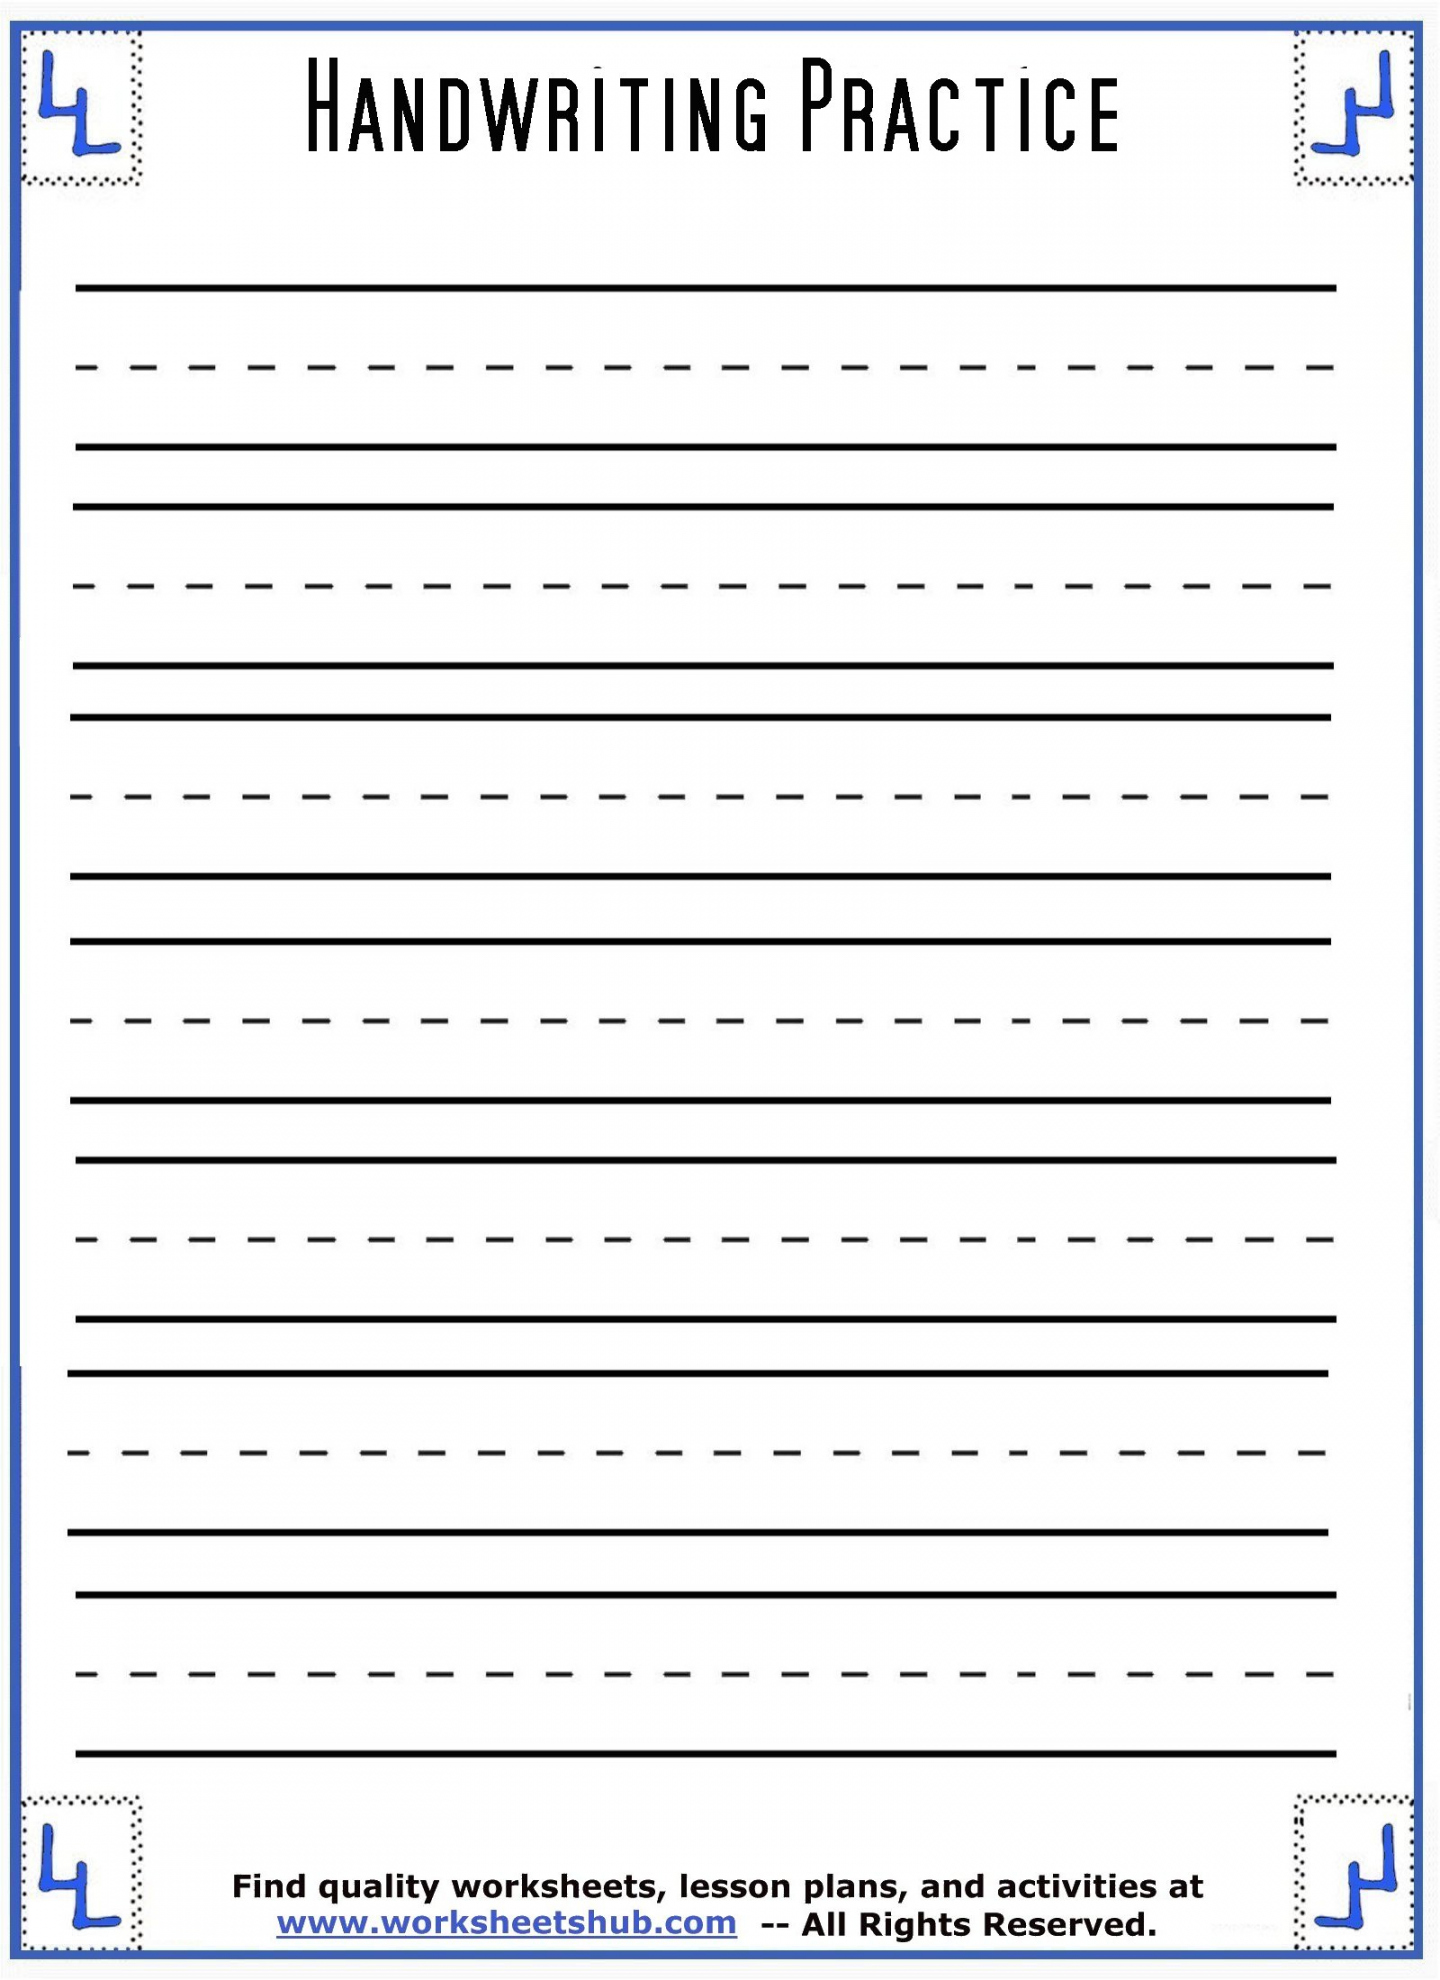 Handwriting Sheets:Printable -Lined Paper - FREE Printables - Lined Paper For Handwriting